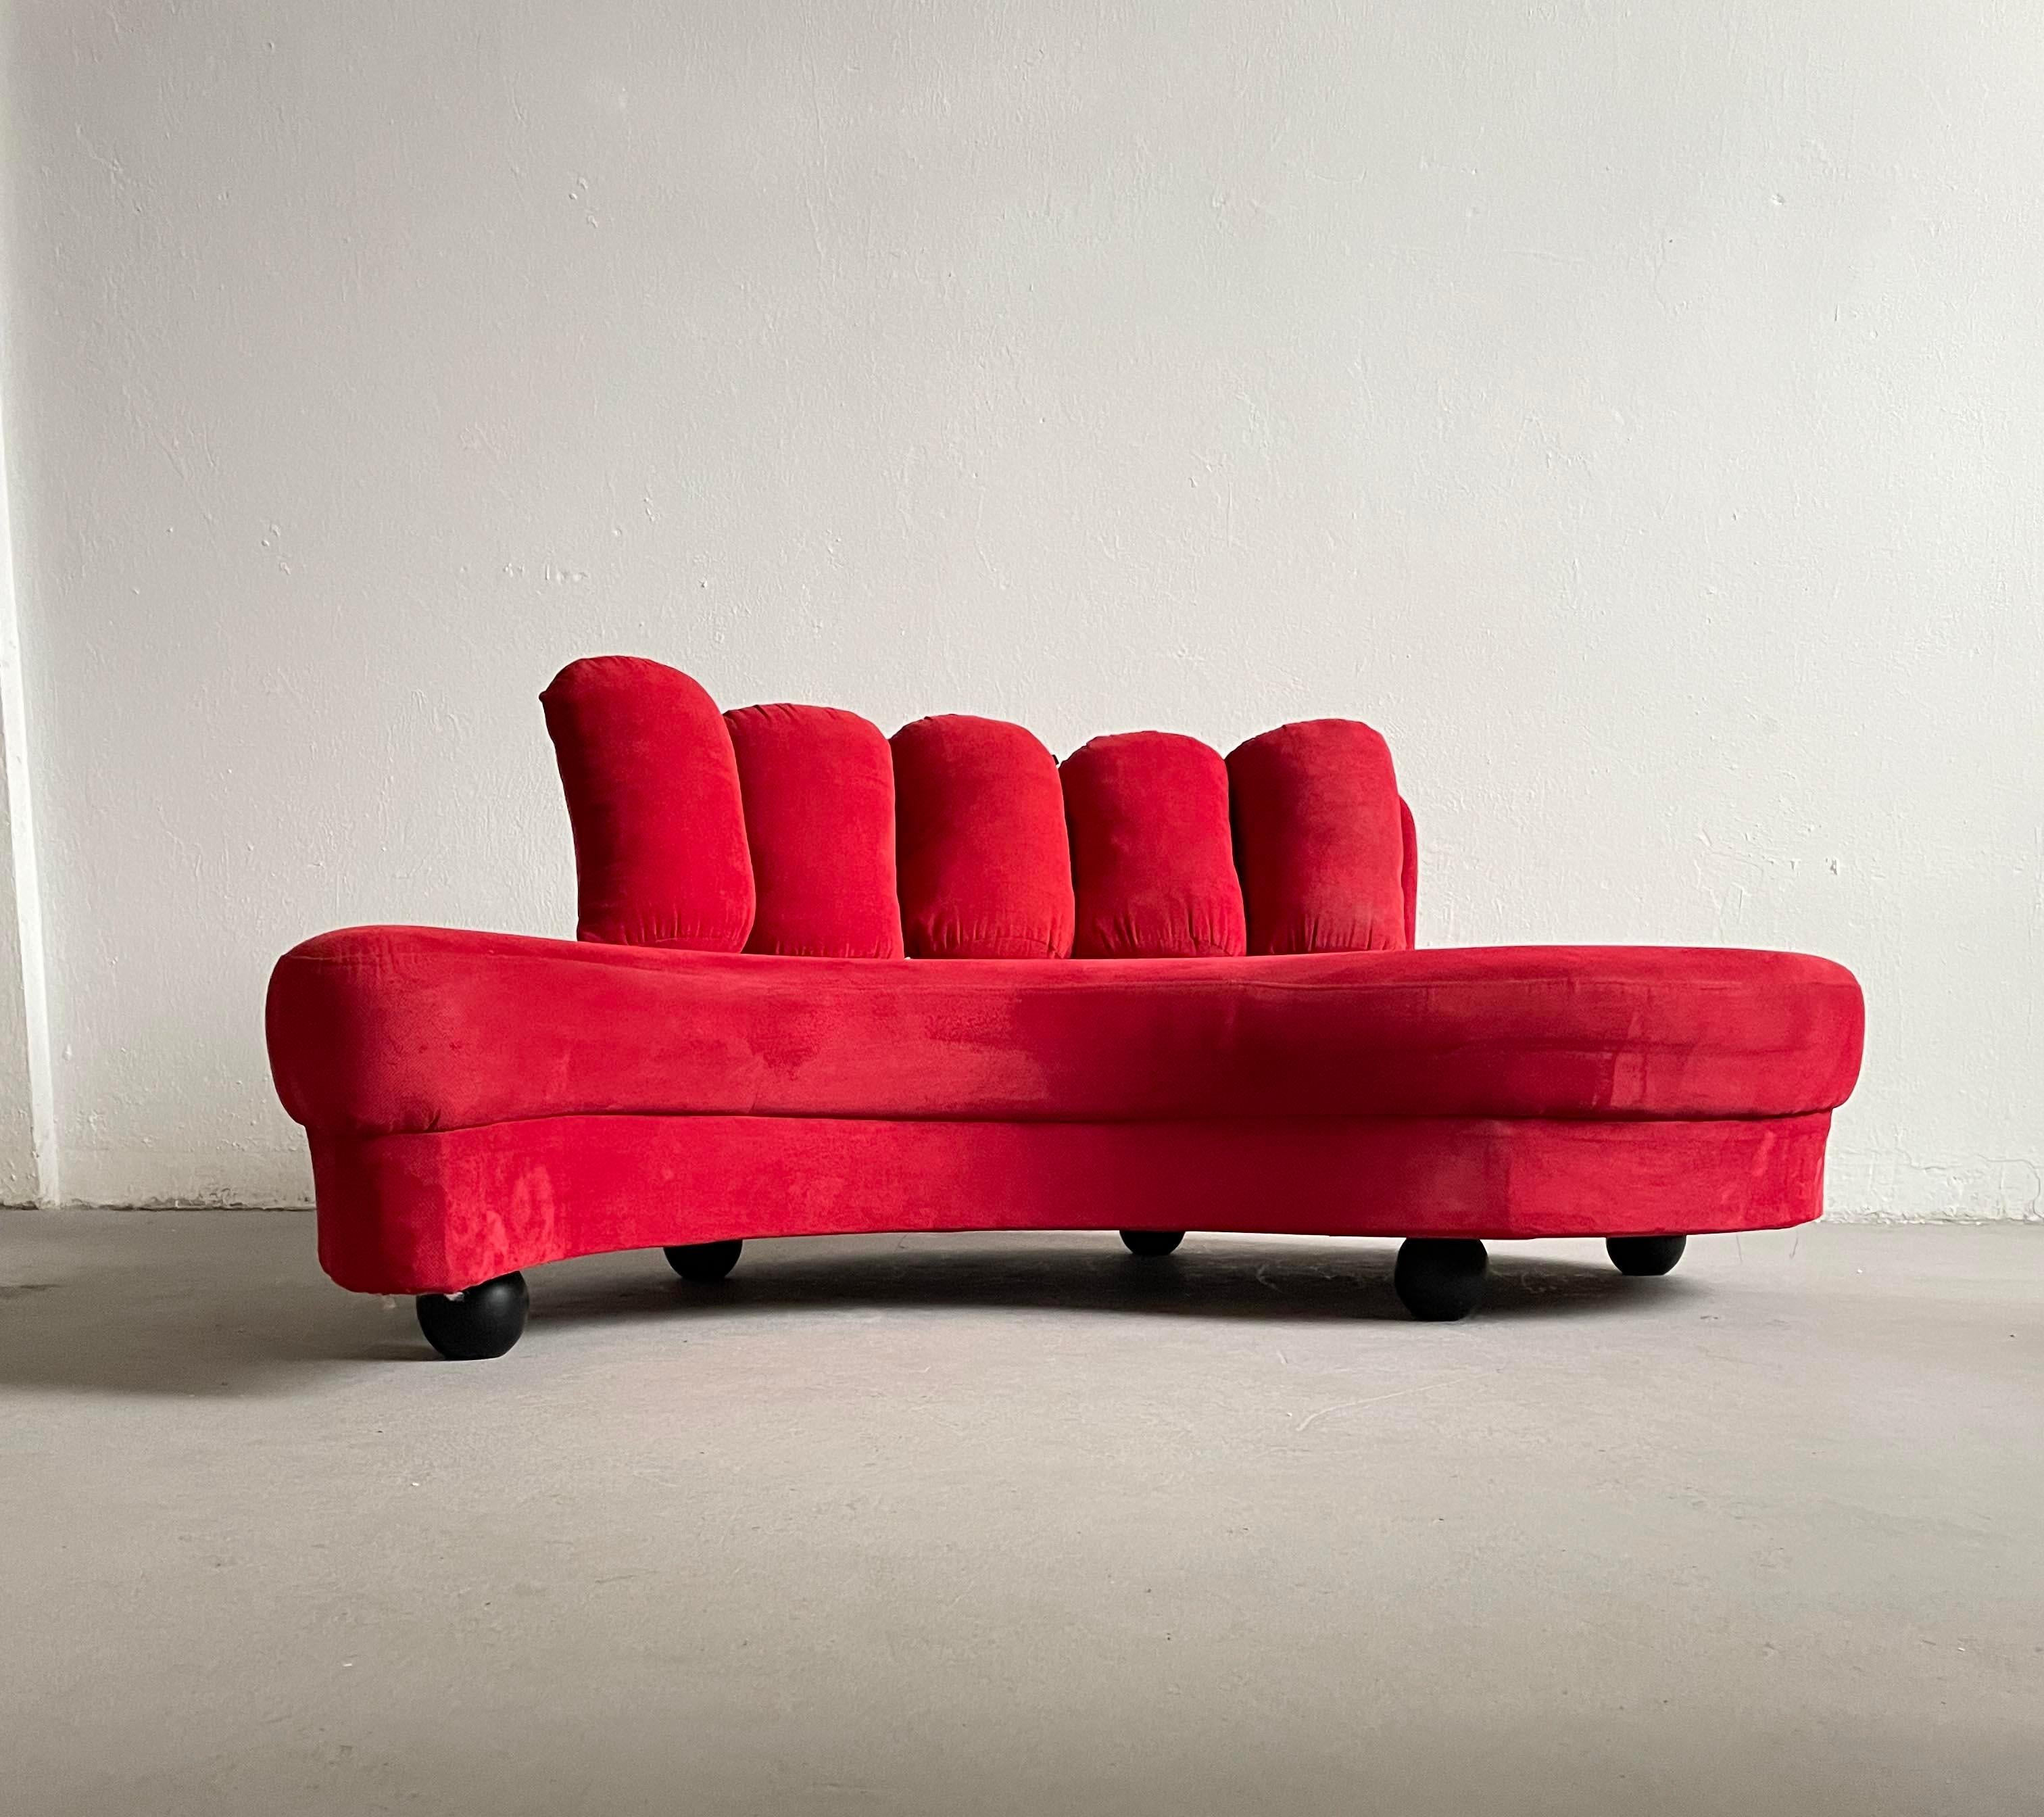 20th Century Set of 2 Postmodern Curved Yin-Yang Shaped Sofa Daybeds in Red Fabric, c 1980s For Sale